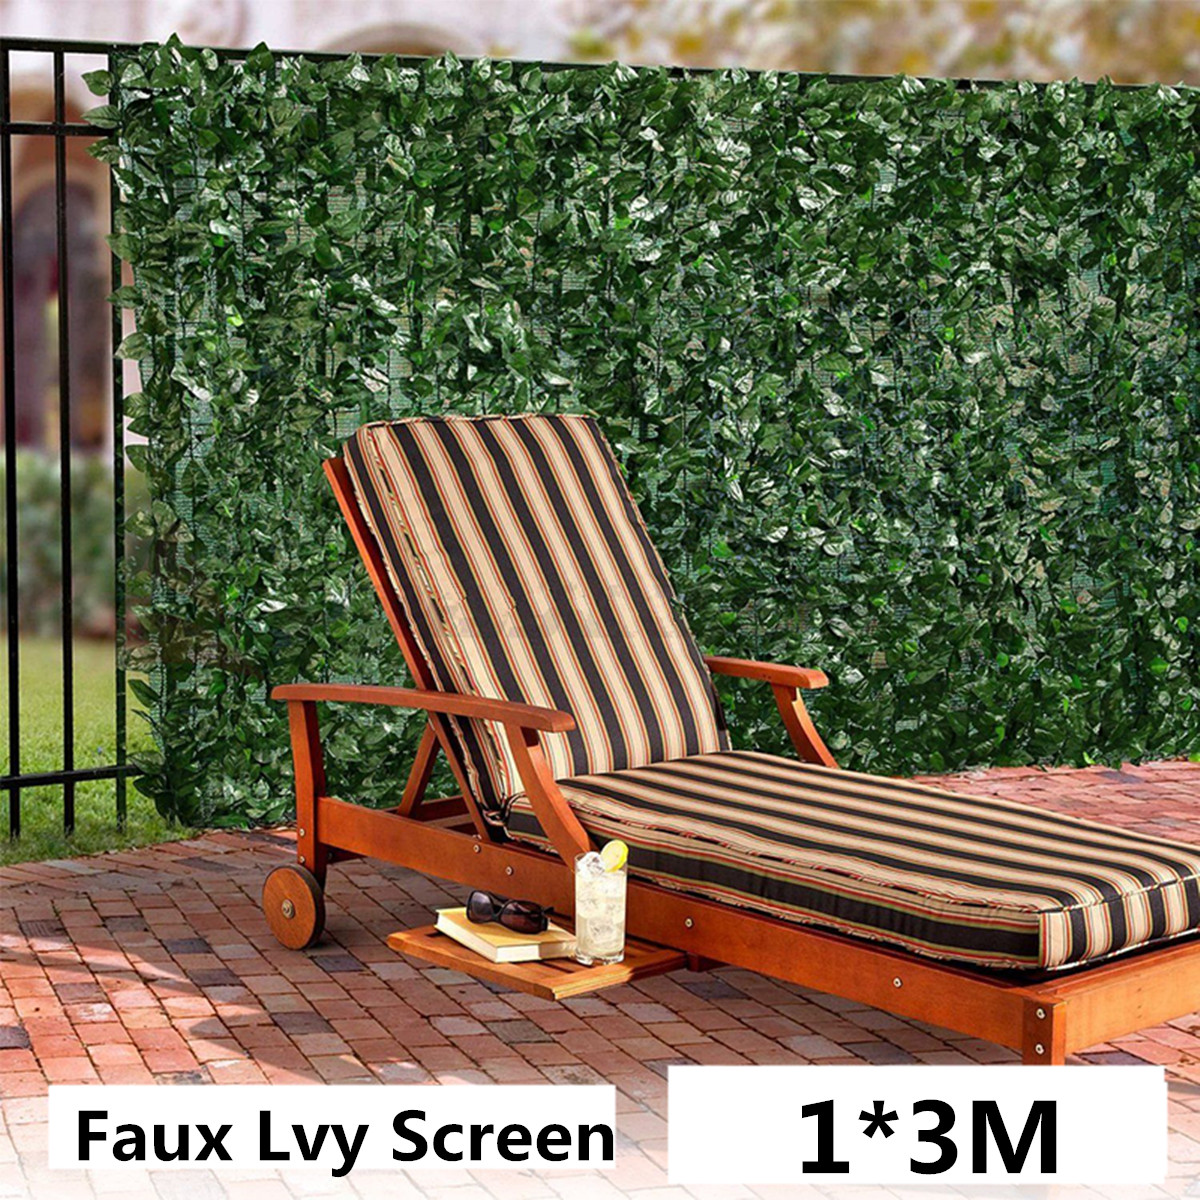 Expanding-13M-Artificial-Lvy-Leaf-Wall-Fence-Green-Garden-Screen-Hedge-Decorations-1474970-1